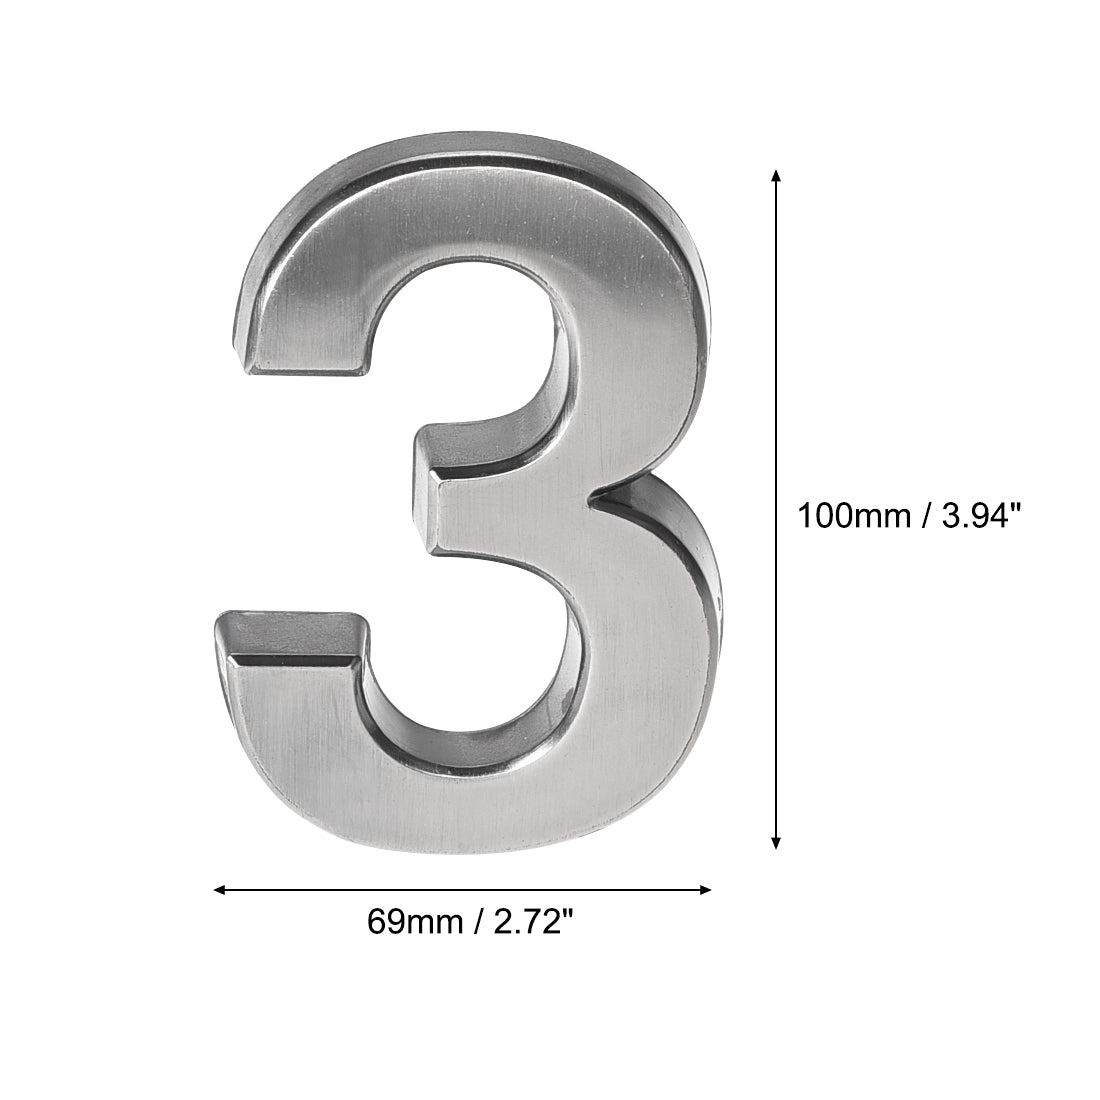 Uxcell Uxcell Self Adhesive House Number 3.94 Inch ABS Plastic Number 4 for House Hotel Mailbox Address Sign Nickel Plated Brushed